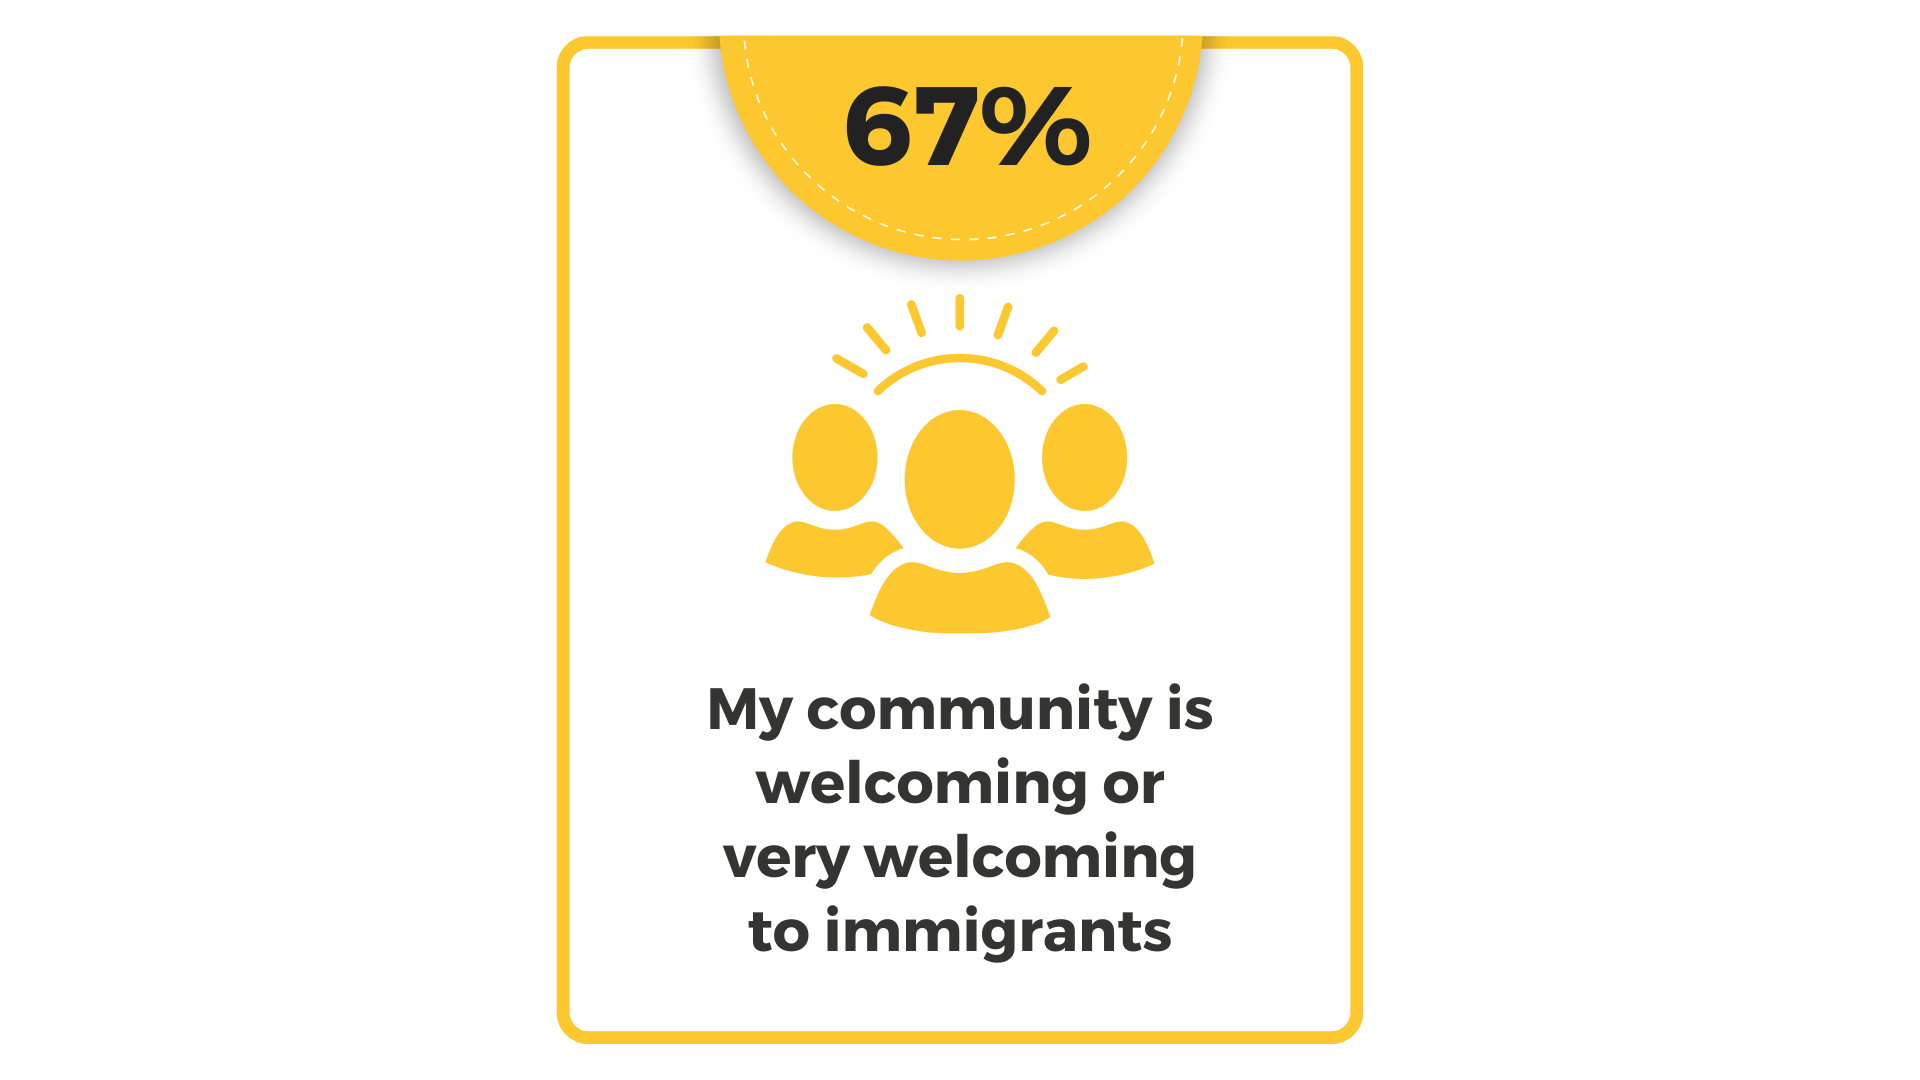 67% respondents said their community was welcoming or very welcoming to immigrants